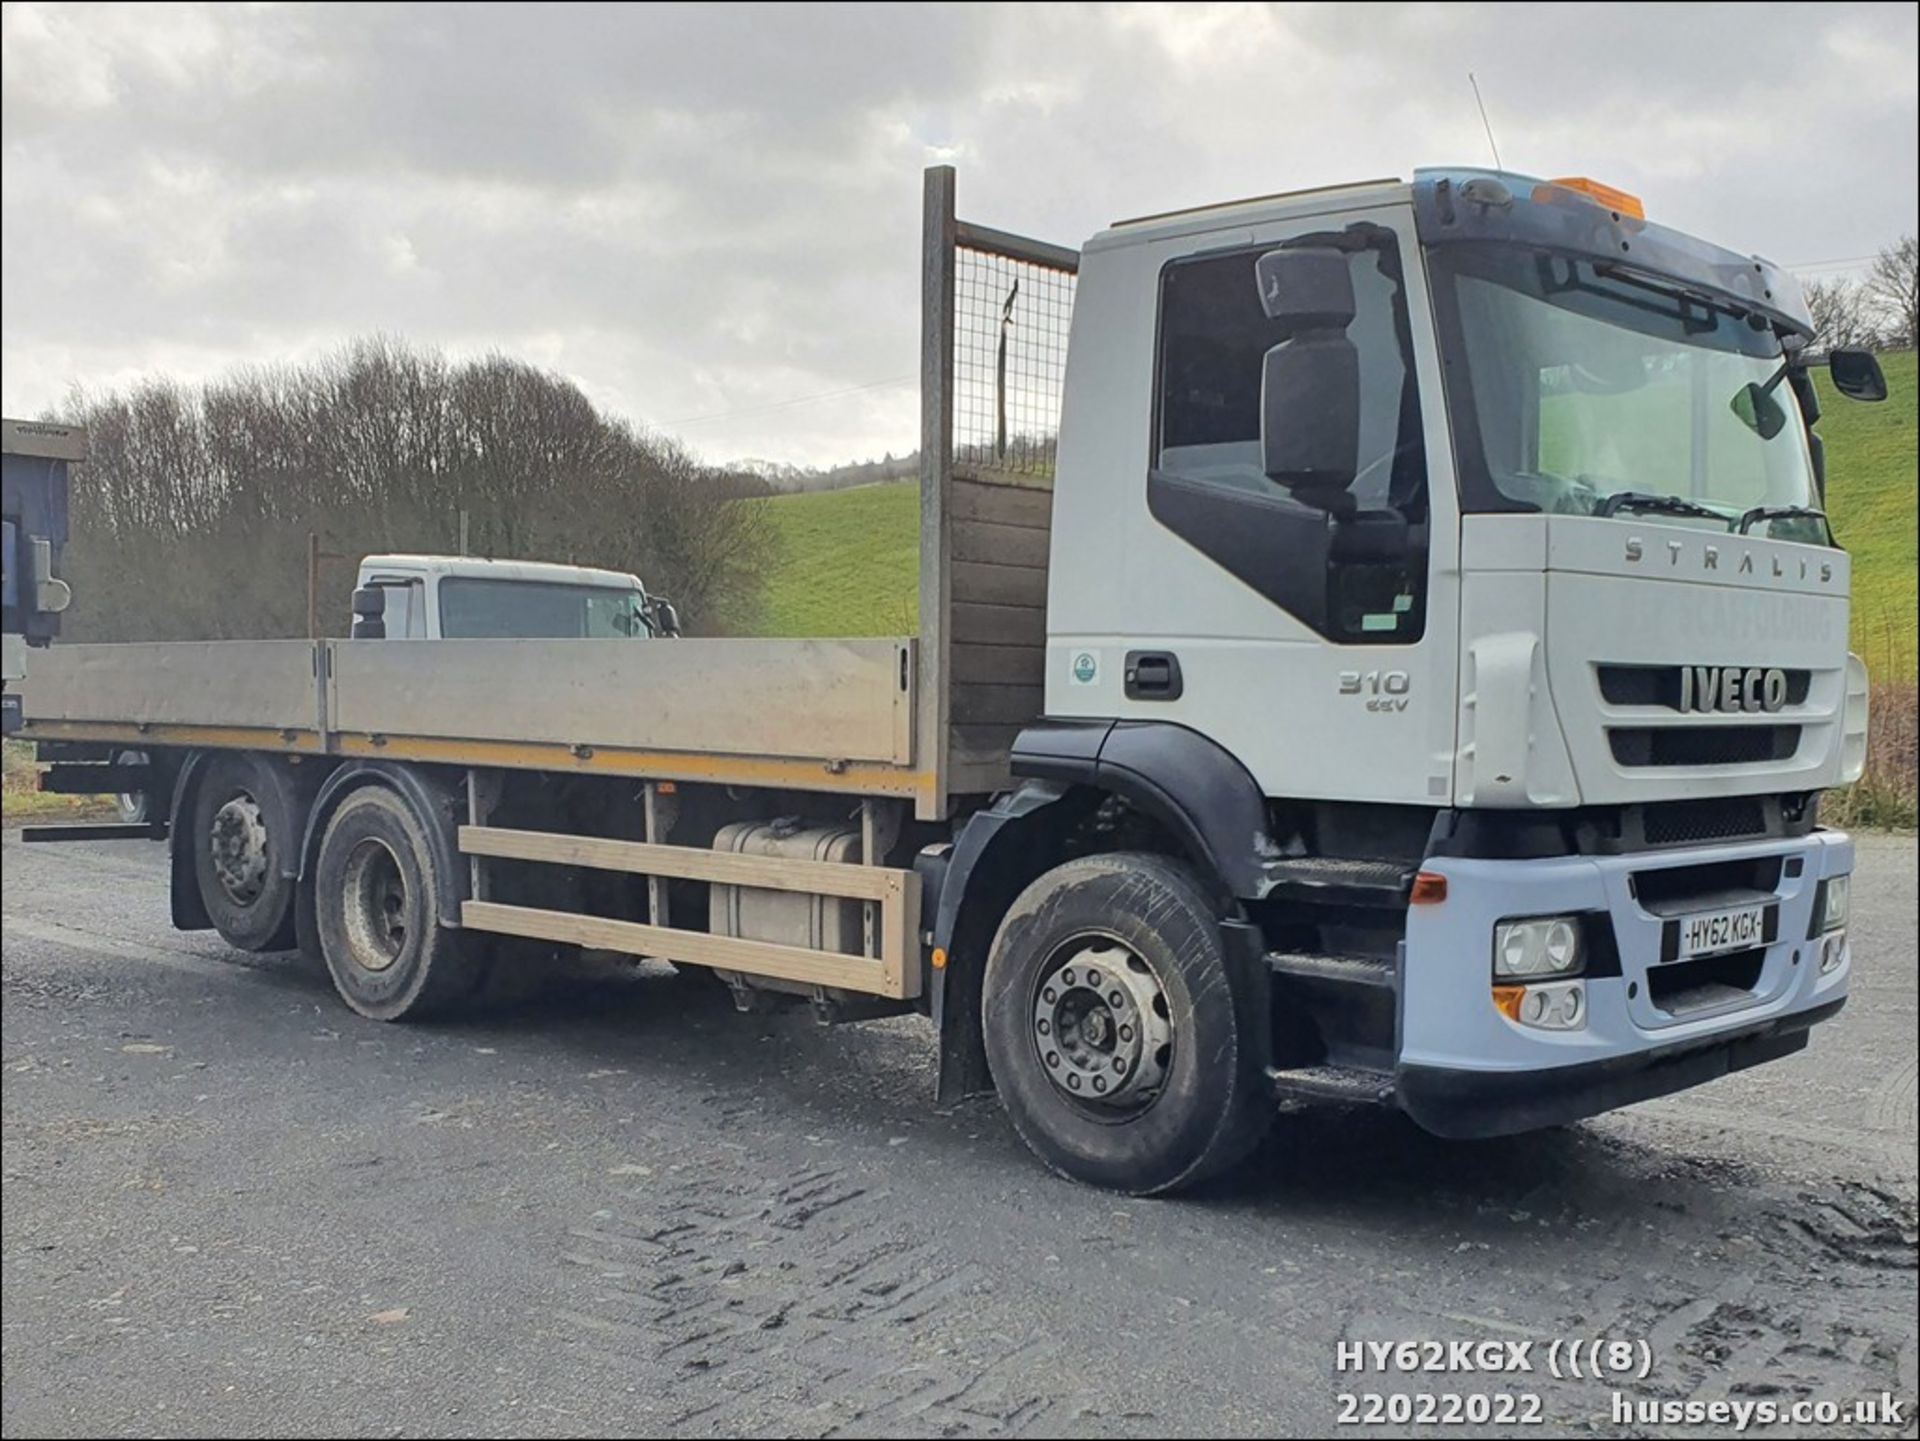 12/62 IVECO STRALIS - 7790cc 2dr Flat Bed (White)